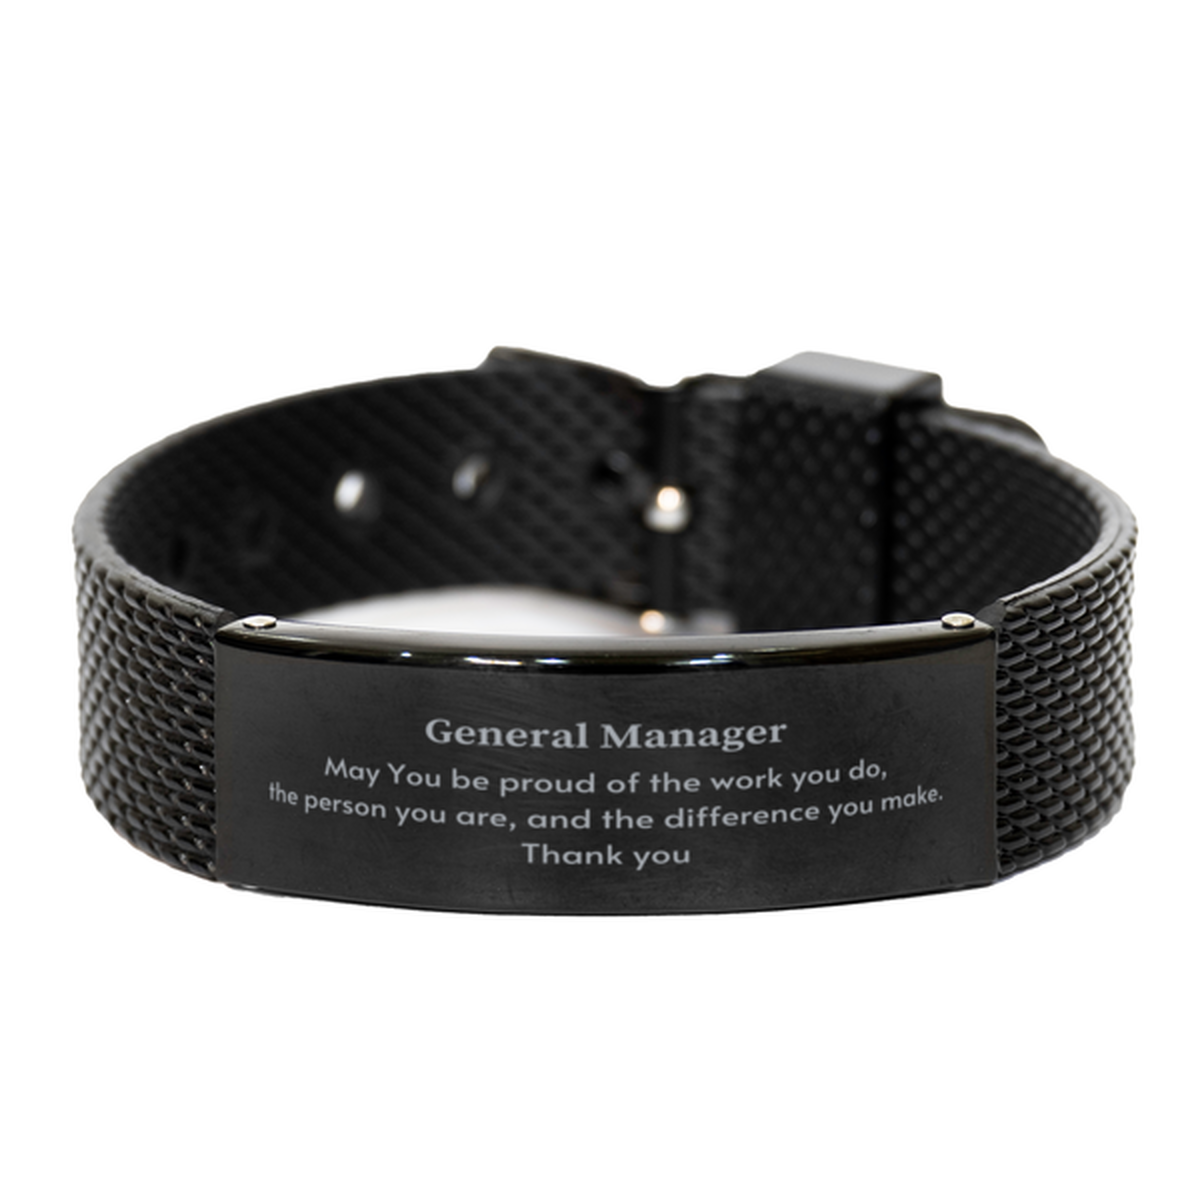 Heartwarming Black Shark Mesh Bracelet Retirement Coworkers Gifts for General Manager, General Manager May You be proud of the work you do, the person you are Gifts for Boss Men Women Friends